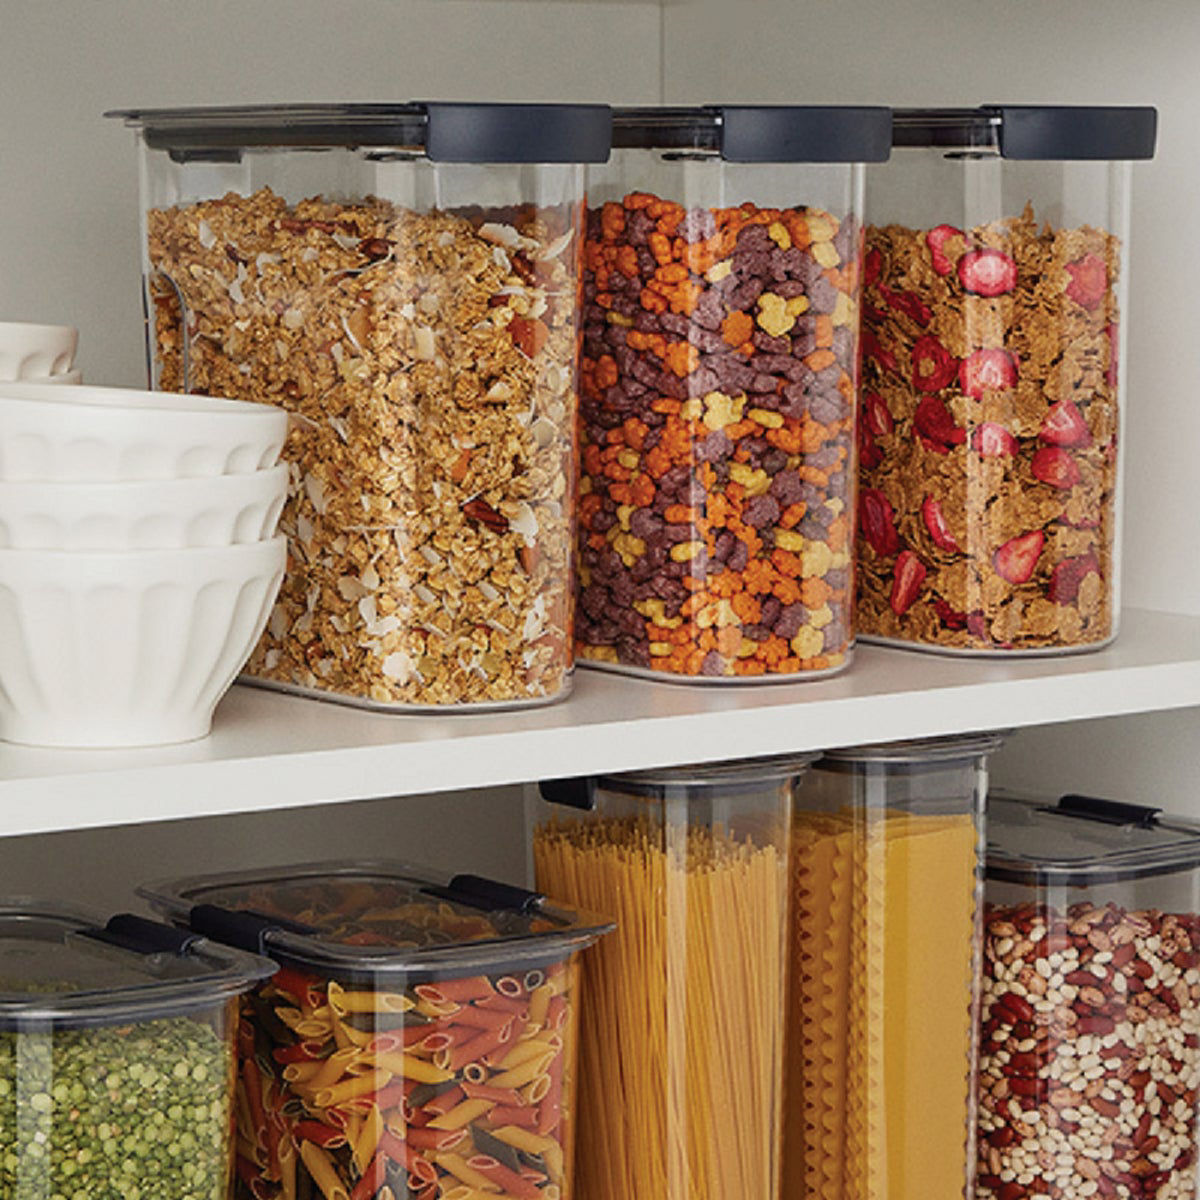 Rubbermaid Brilliance 18-Cup Airtight Cereal Clear Food Storage